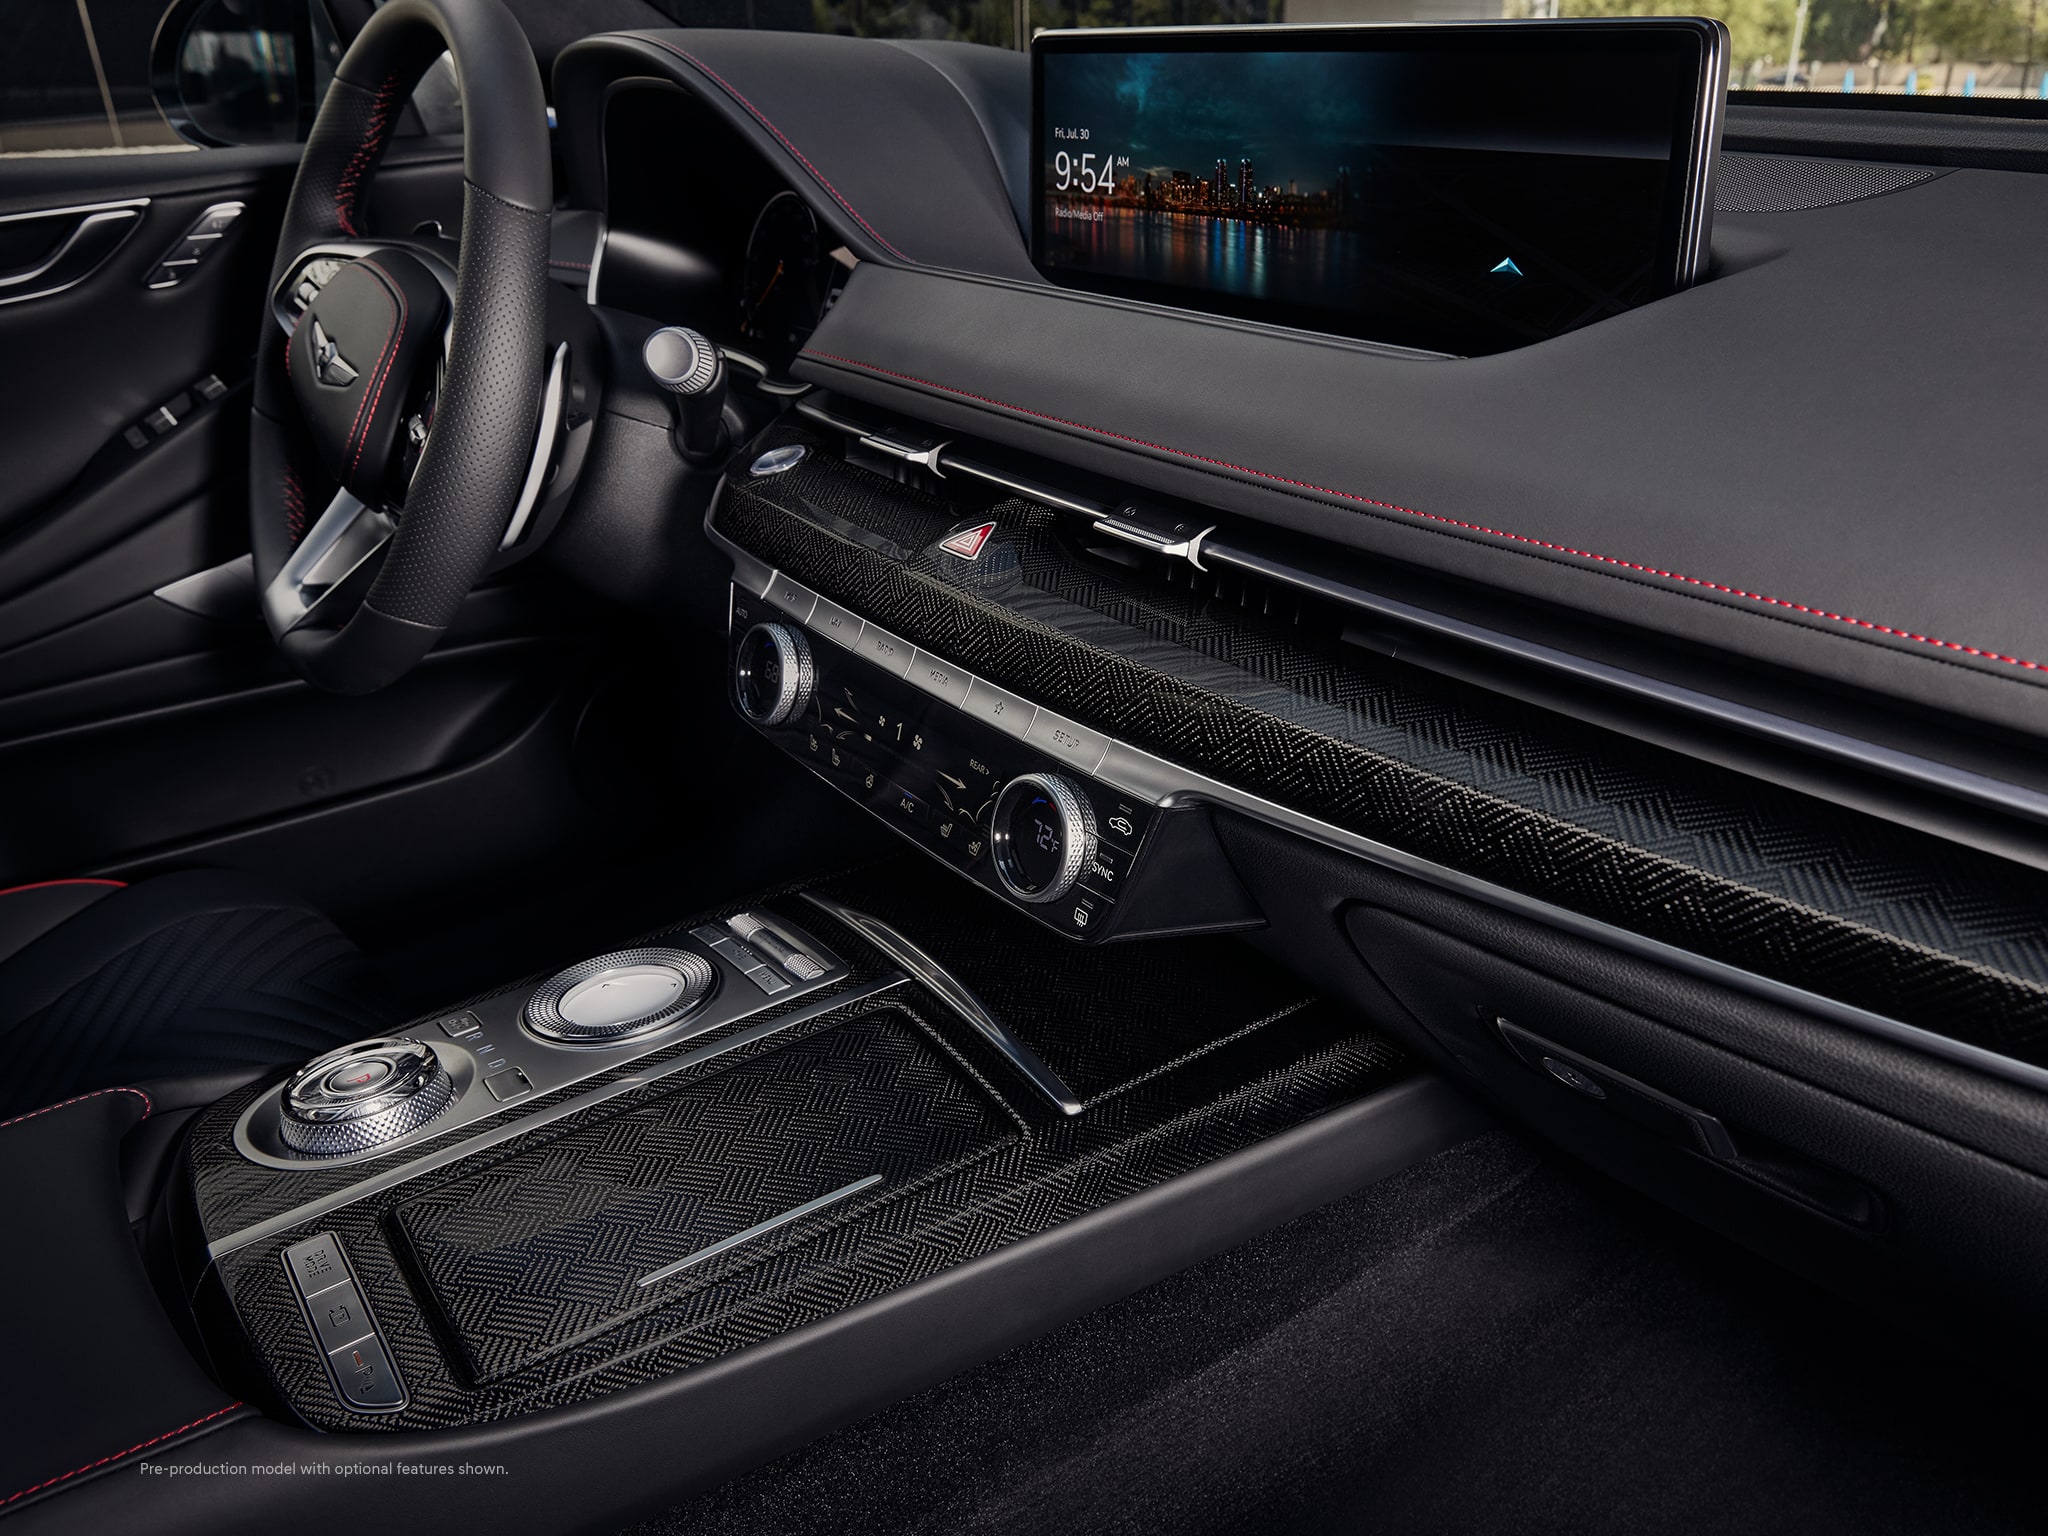 2022 Genesis G80 interior shown in Black with Red Stitching.